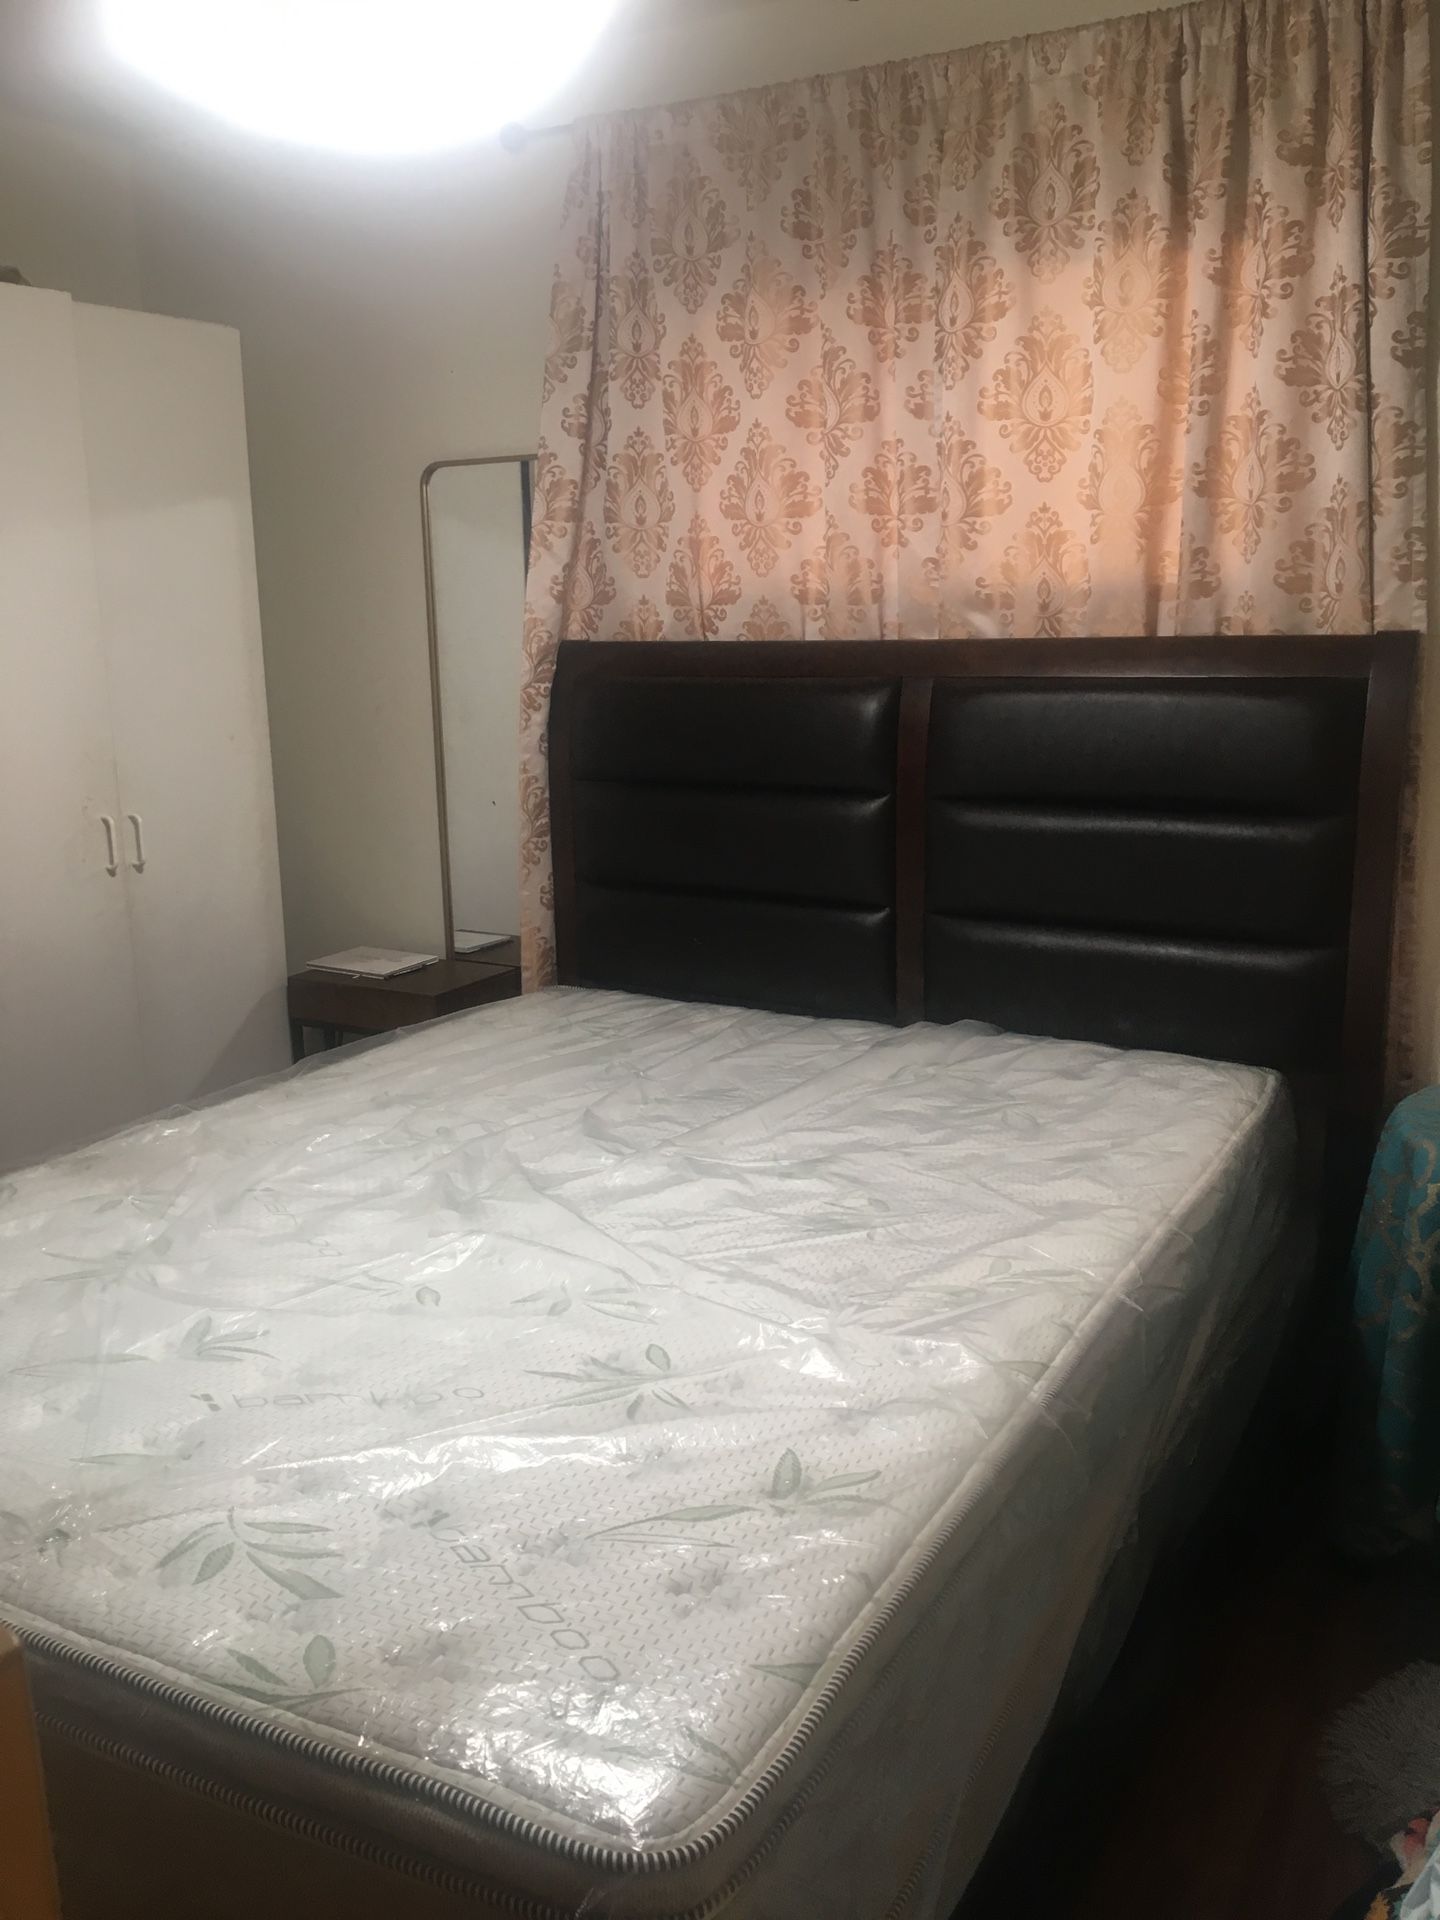 Queen mattress with box spring